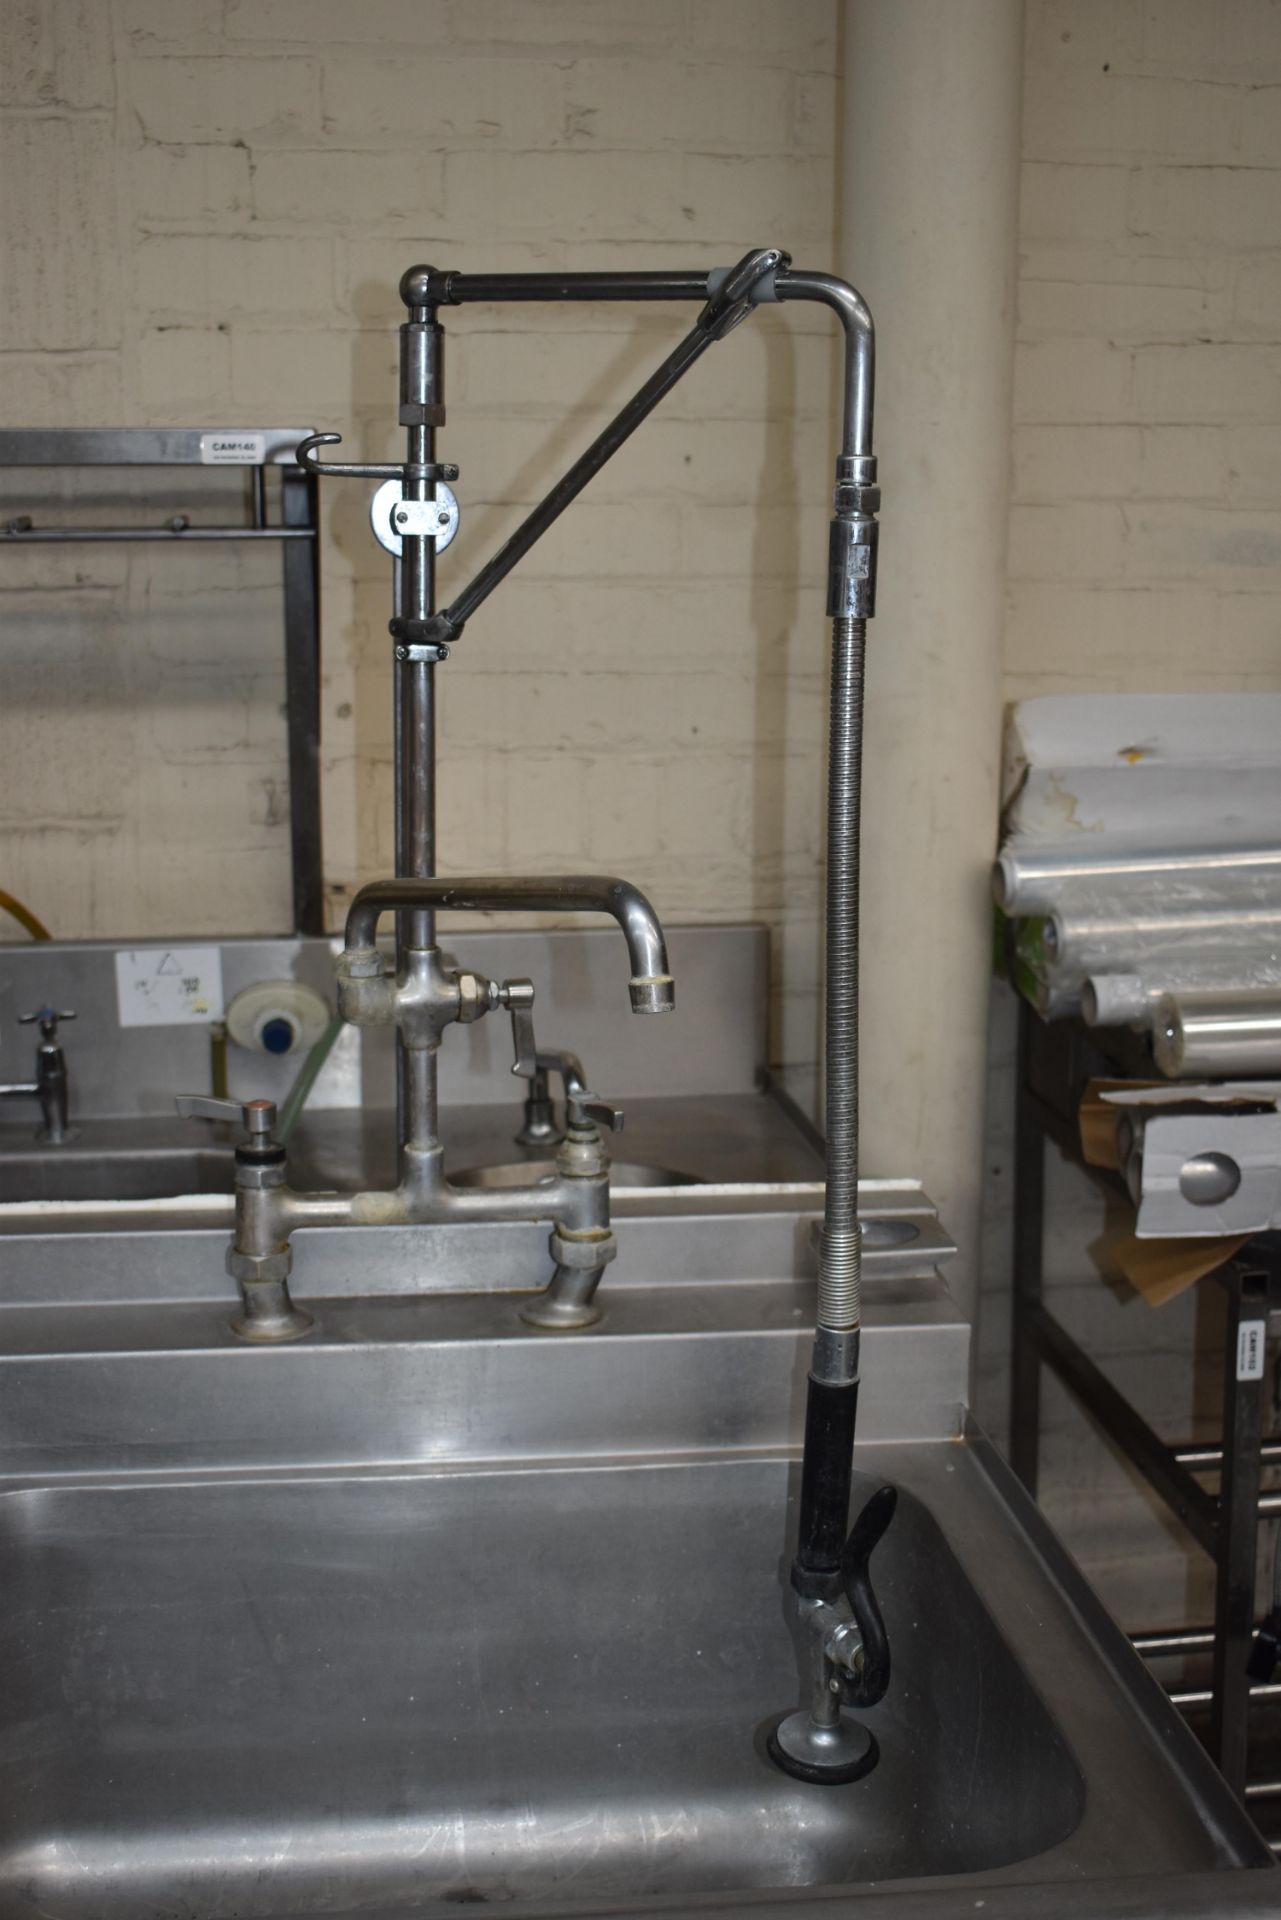 1 x Stainless Steel Commercial Wash Basin Unit With Twin Sink Bowl and Drainers, Mixer Taps, Spray - Image 2 of 12